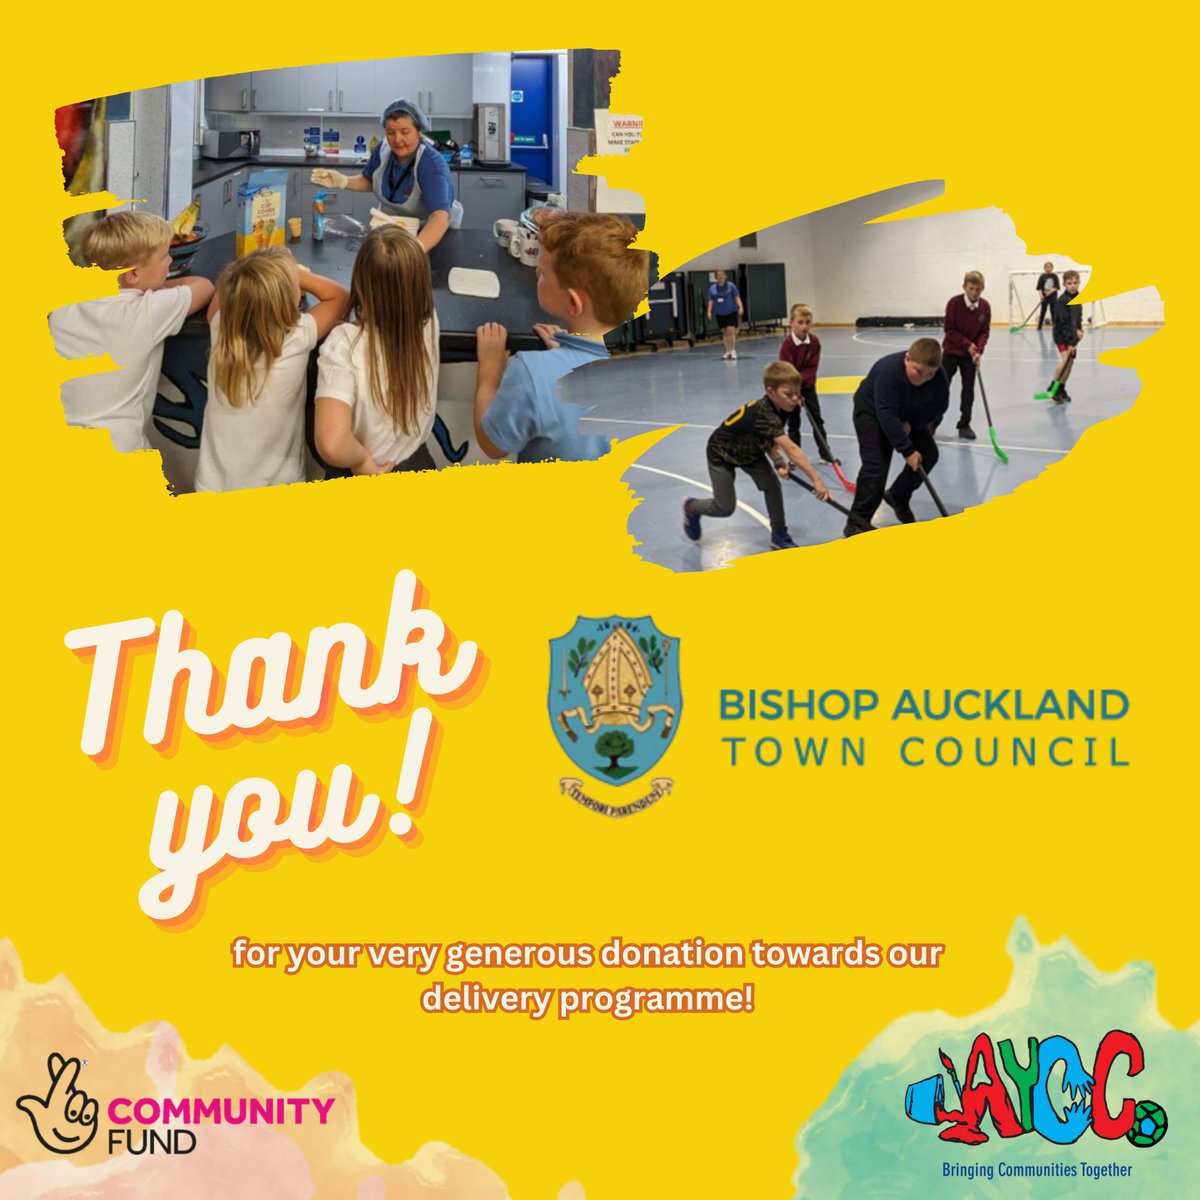 Great news! 🥳 Our friends at Bishop Auckland Town Council have very generously provided us a donation of £5000 today to support children and families in the area❤️Everyone at AYCC is thrilled and thanks the council for their thoughts and continued support.